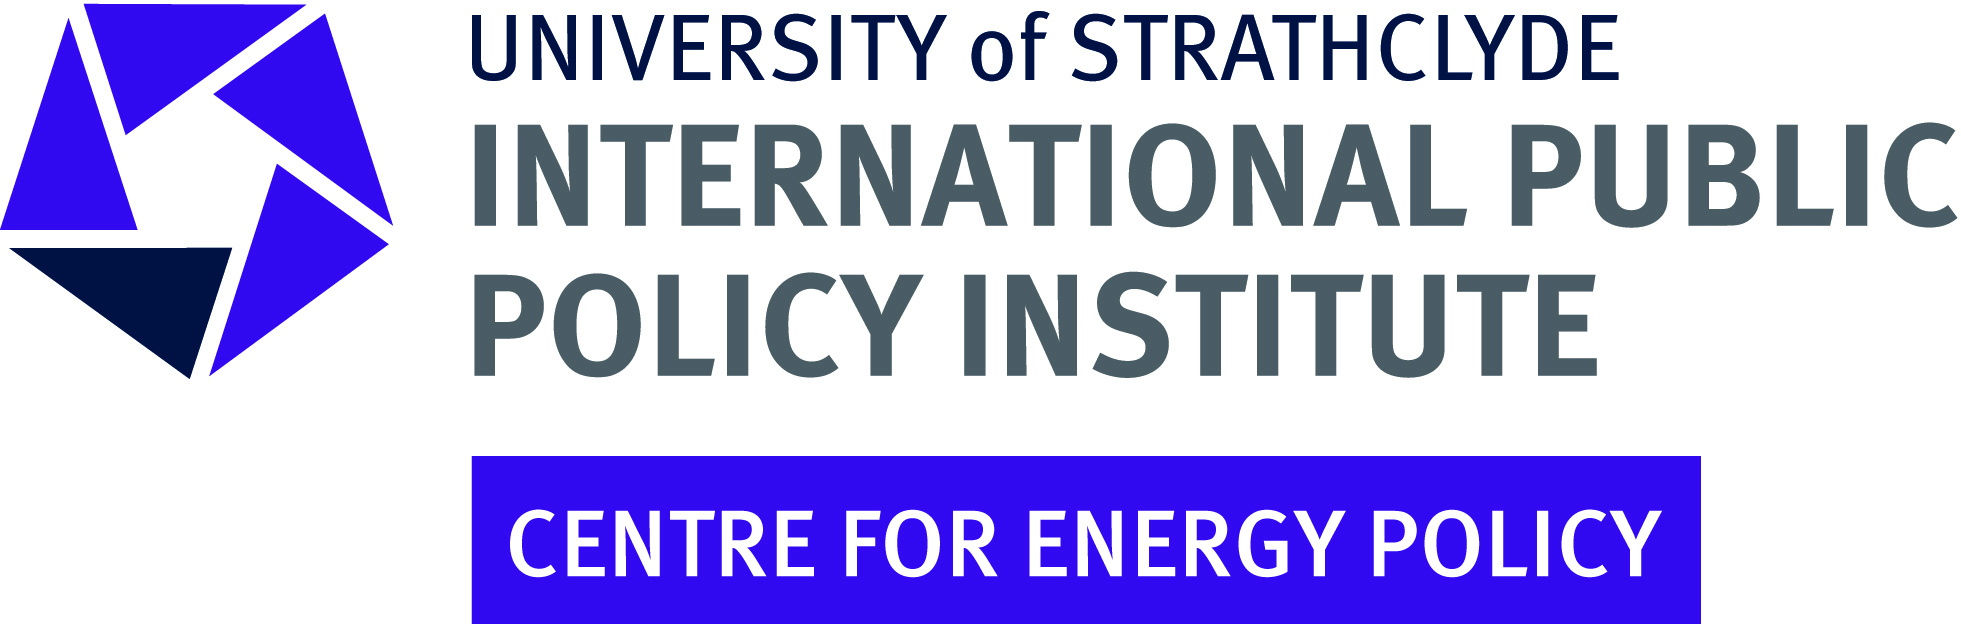 Centre for Energy Policy logo